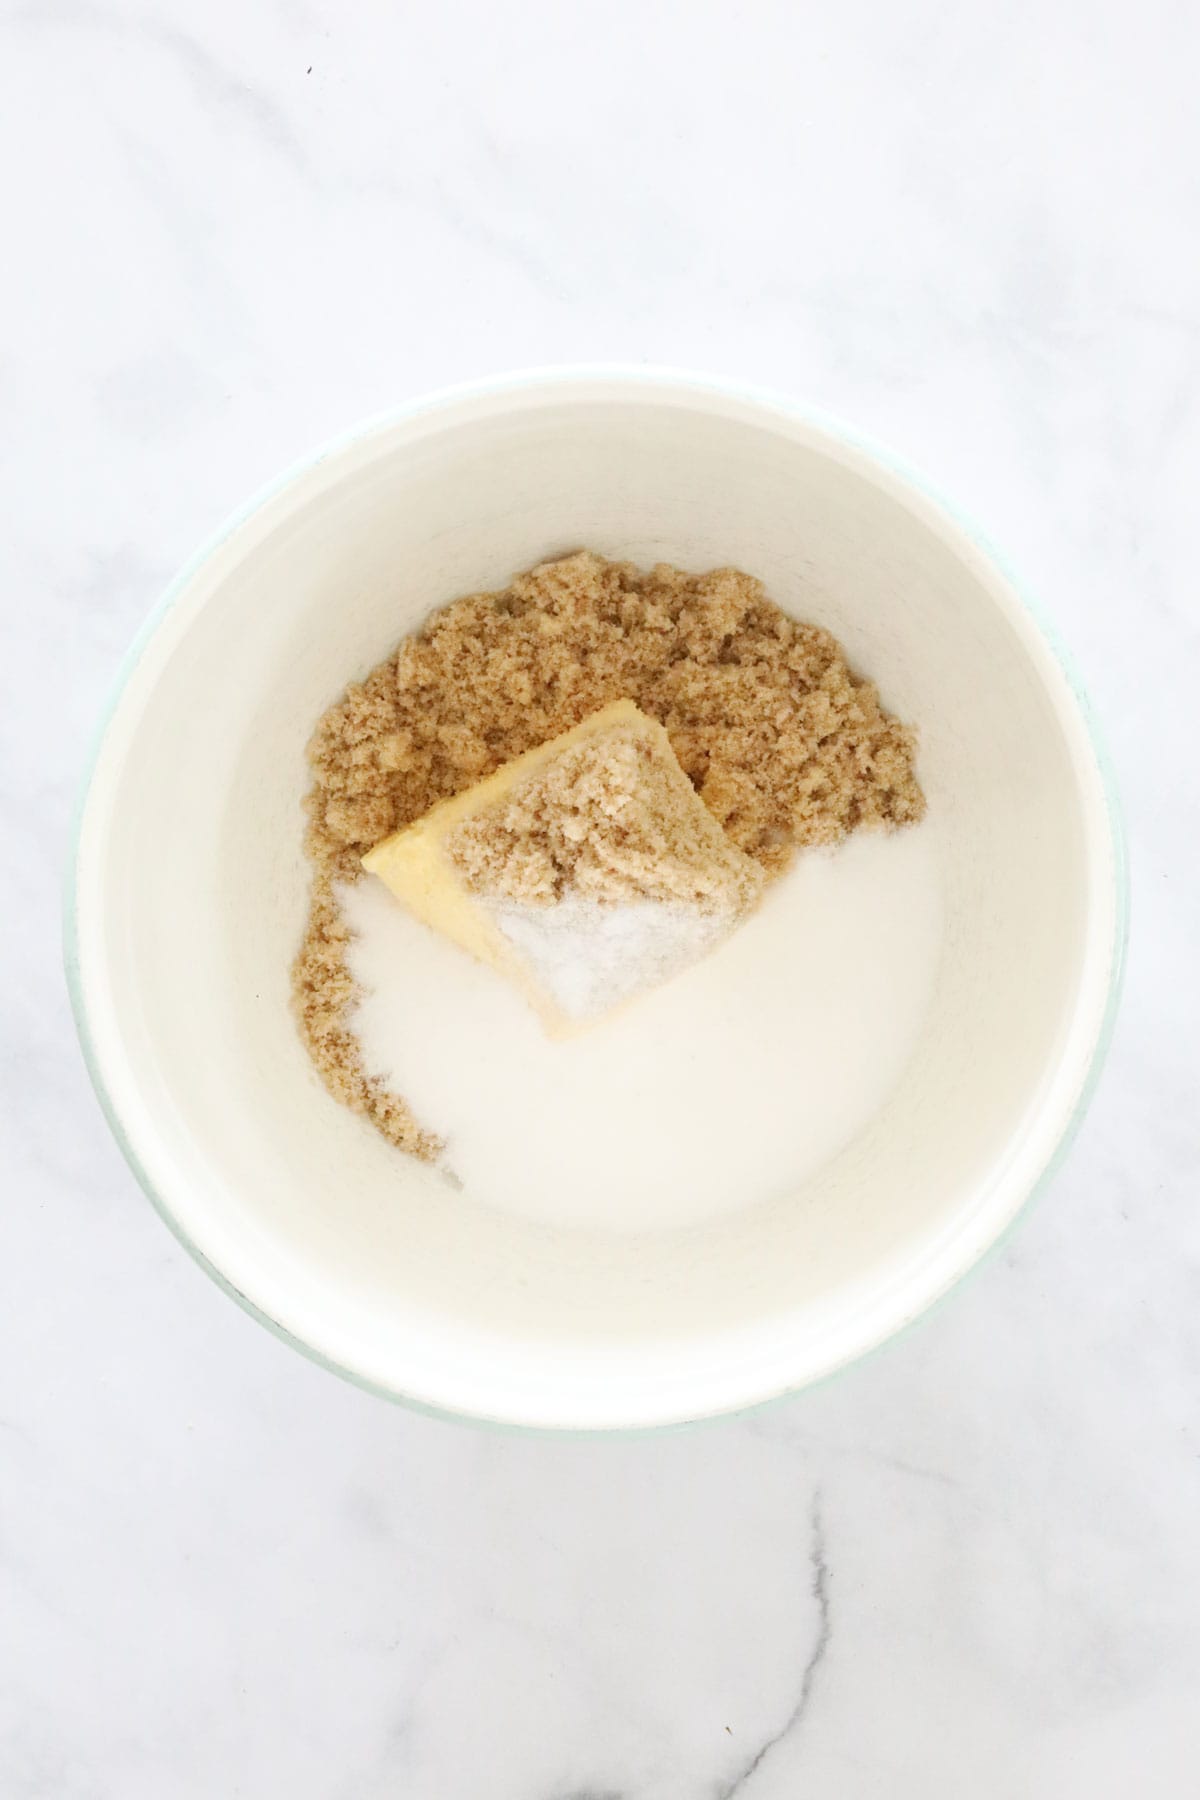 Butter, brown sugar and white sugar in a bowl.